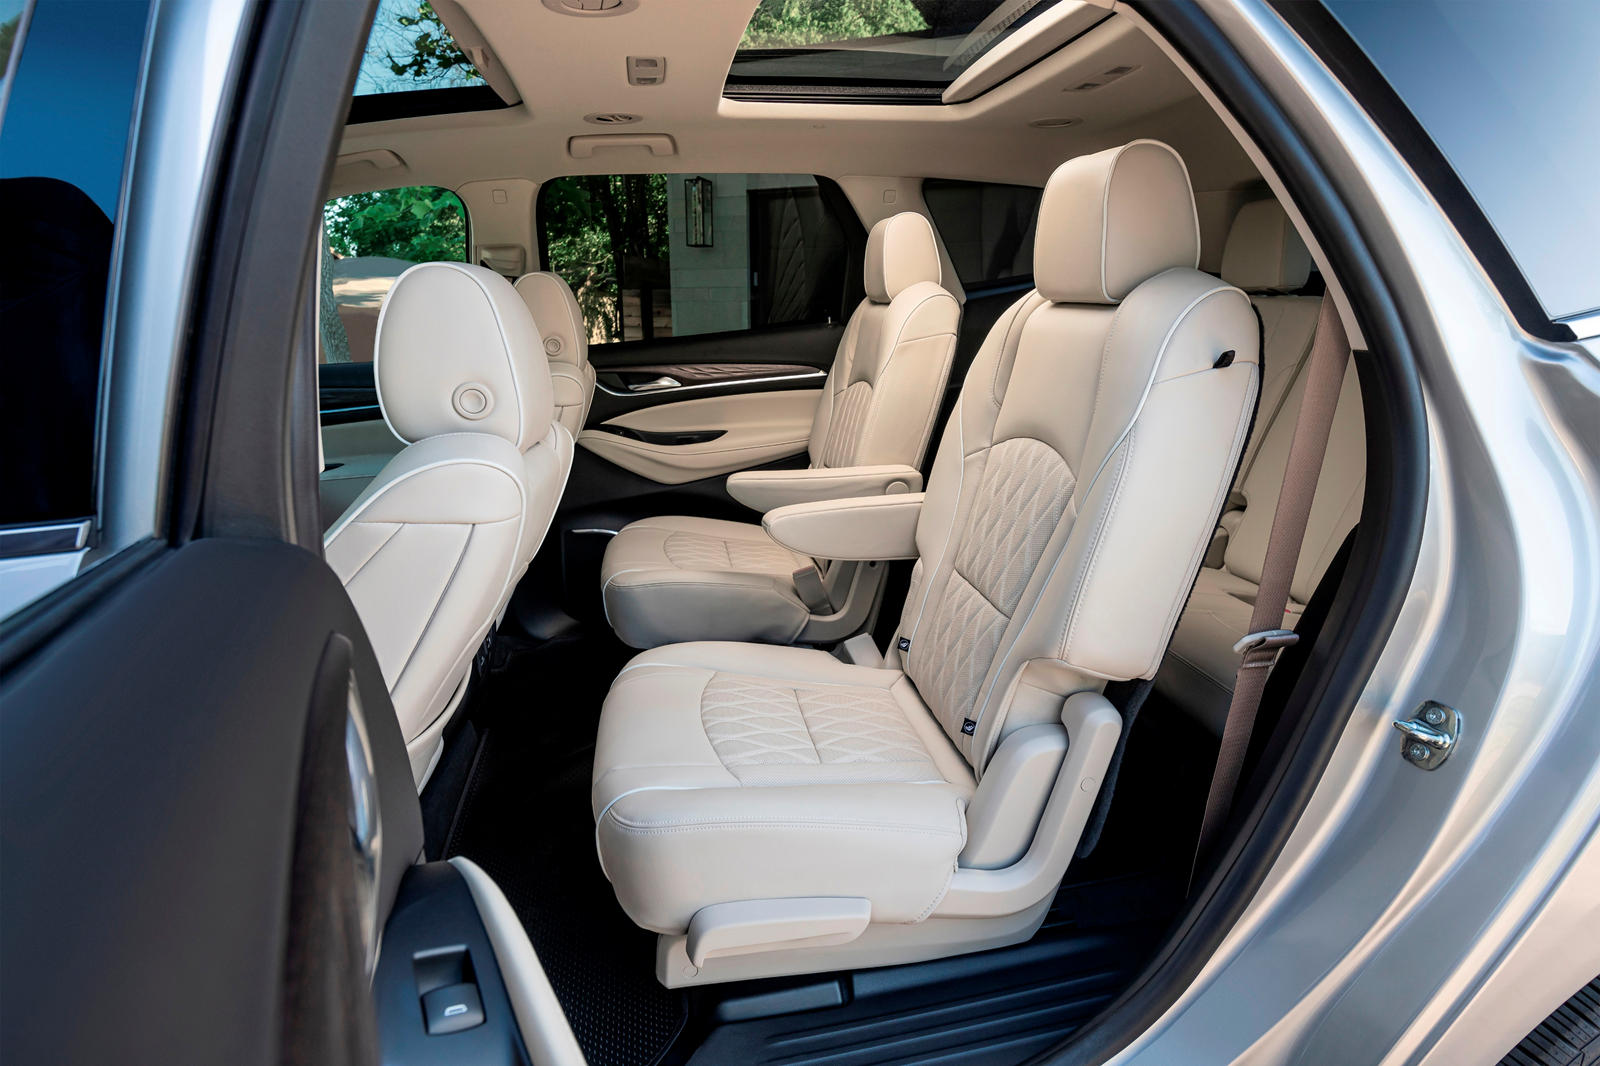 2023 Buick Enclave Interior Dimensions: Seating, Cargo Space & Trunk Size -  Photos | CarBuzz